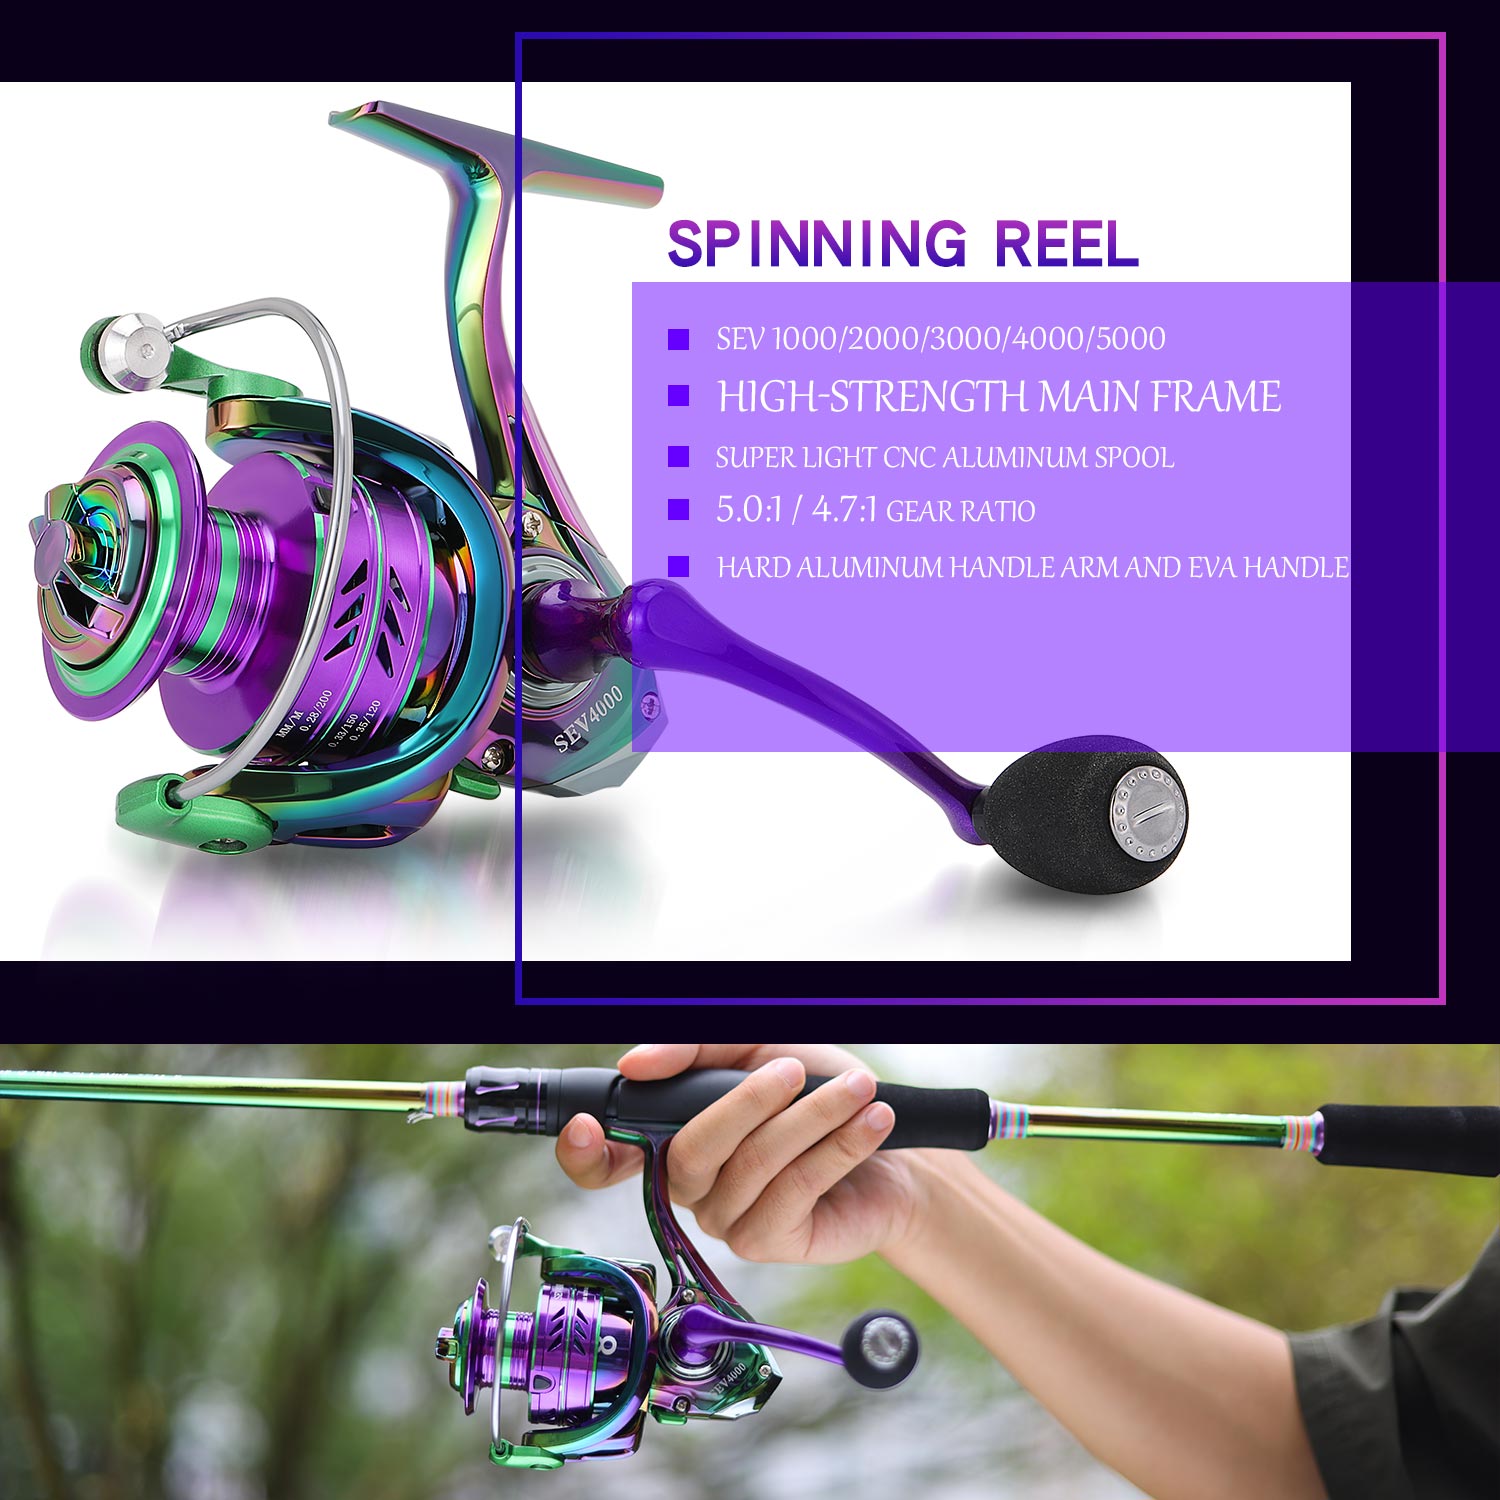 Sougayilang Fishing Reels 5.2:1 Gear Ratio Spinning Reel 10KG Max Drag  Super Strong Fishing Wheel for All Waters